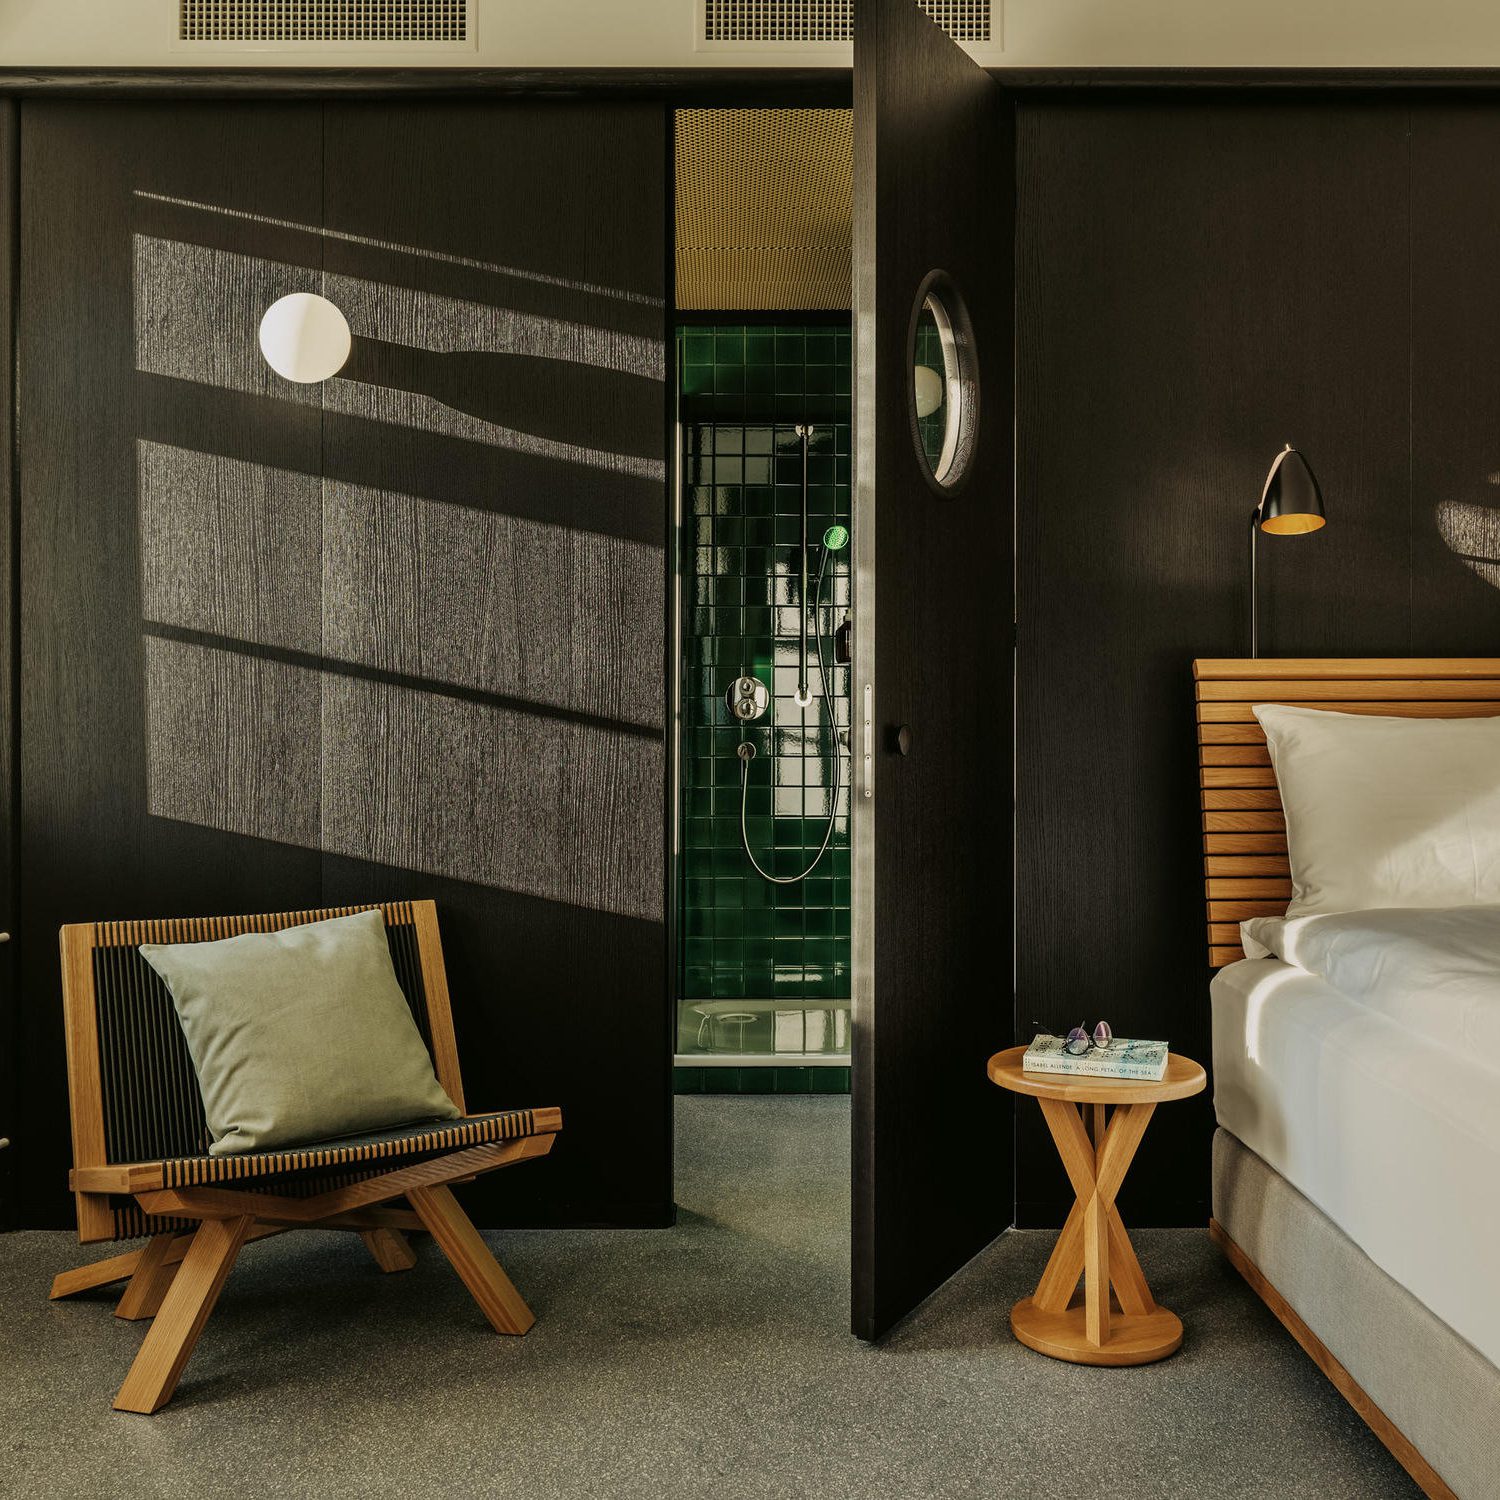 Bedroom with wooden furnishings looking into a green-tiled bathroom